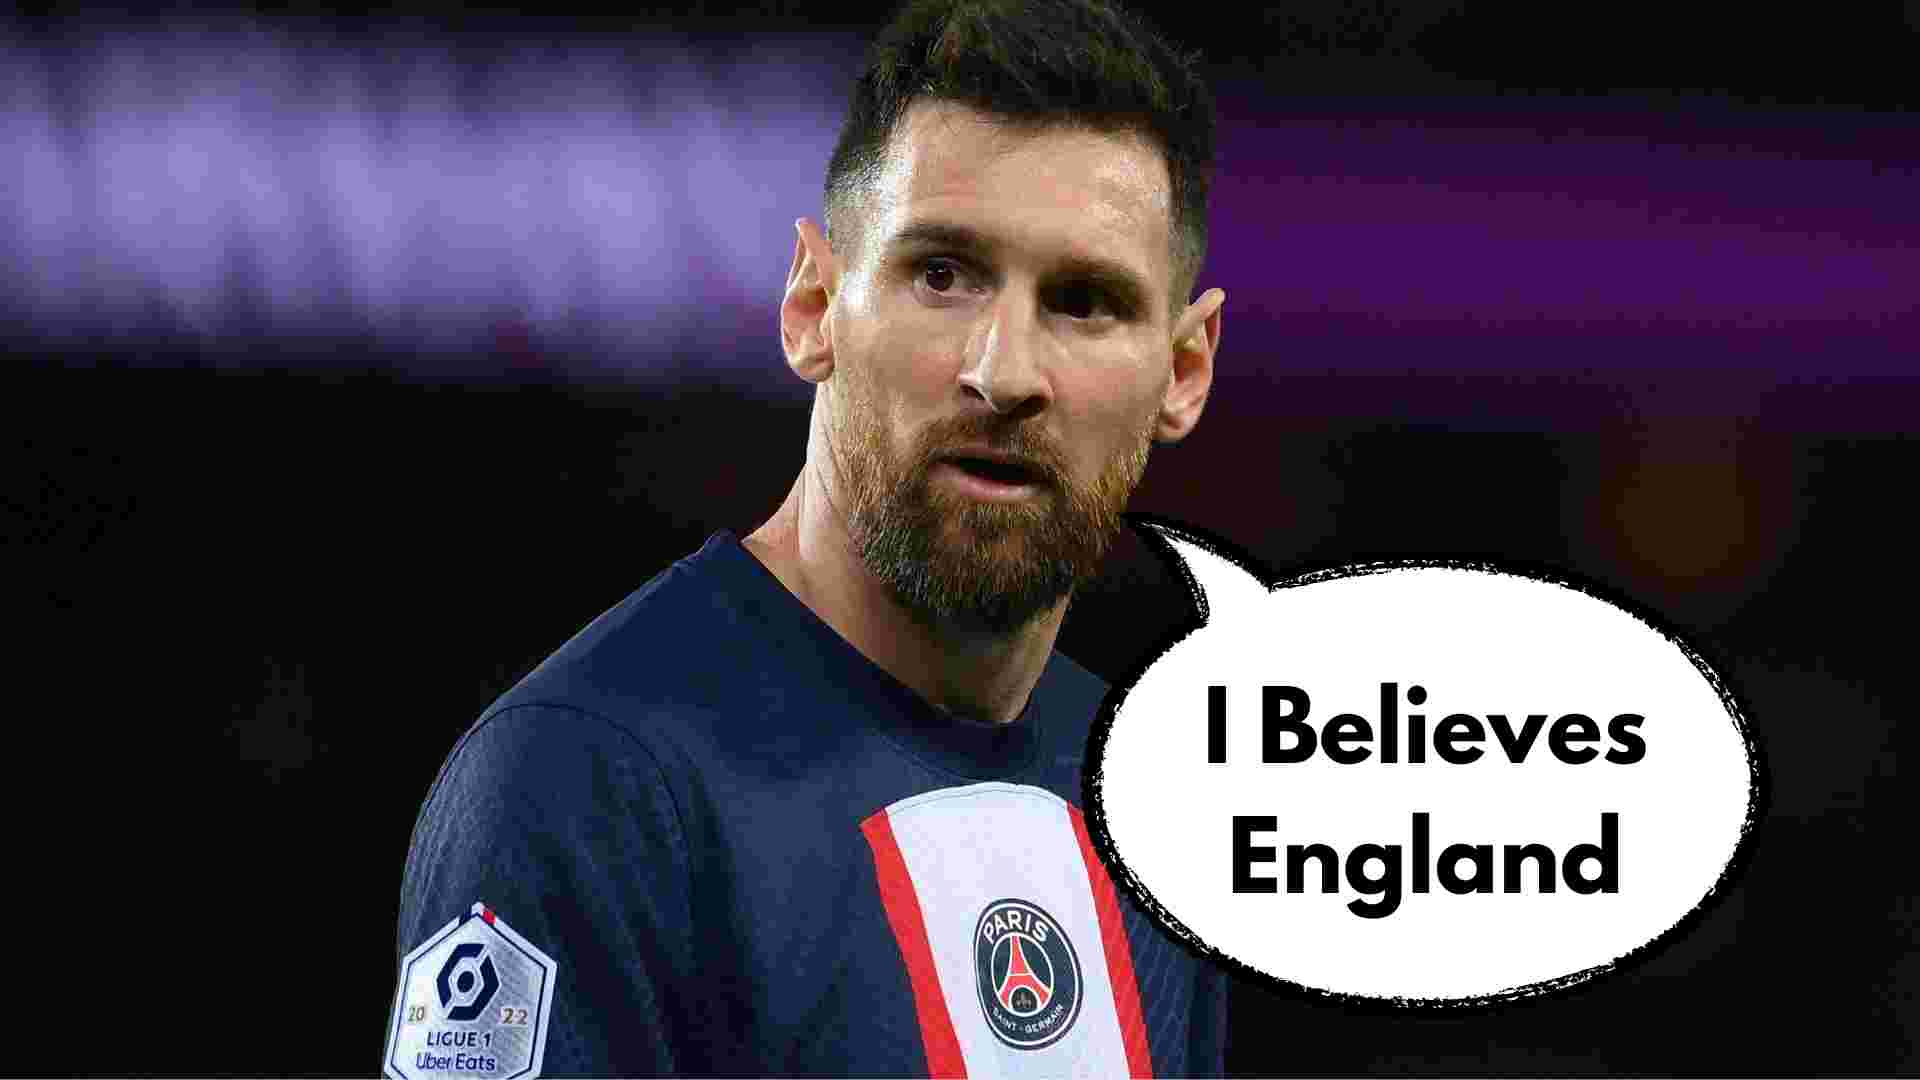 Lionel Messi has England as one of his World Cup favorites